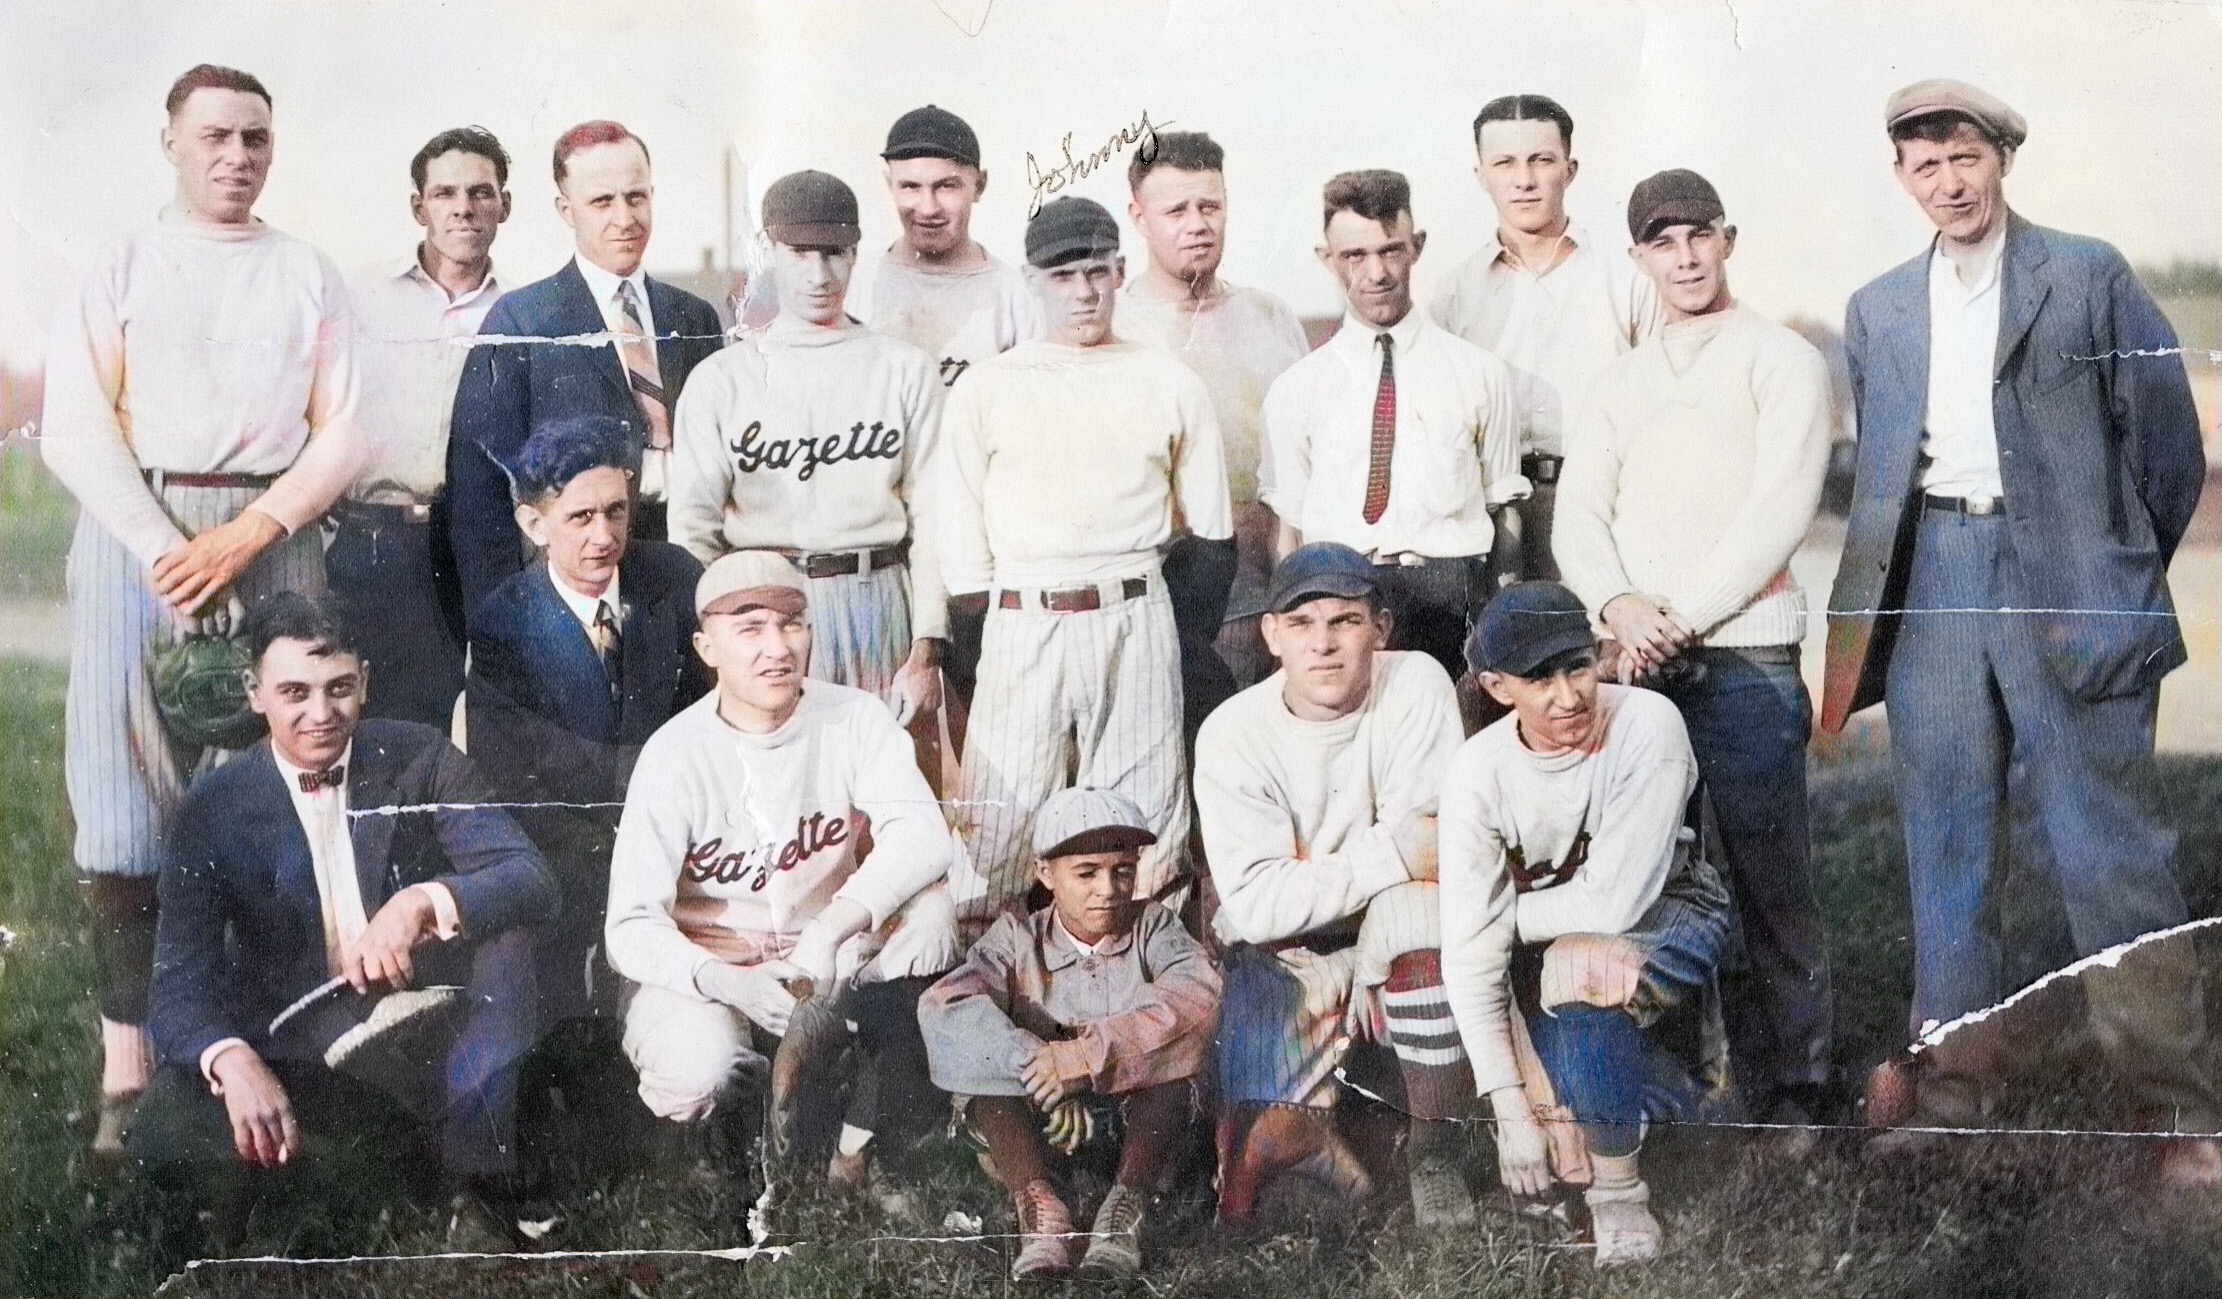 Niagara Falls Gazette baseball team in the 1920s. My dad, Johnny labeled in the pocture, was my father